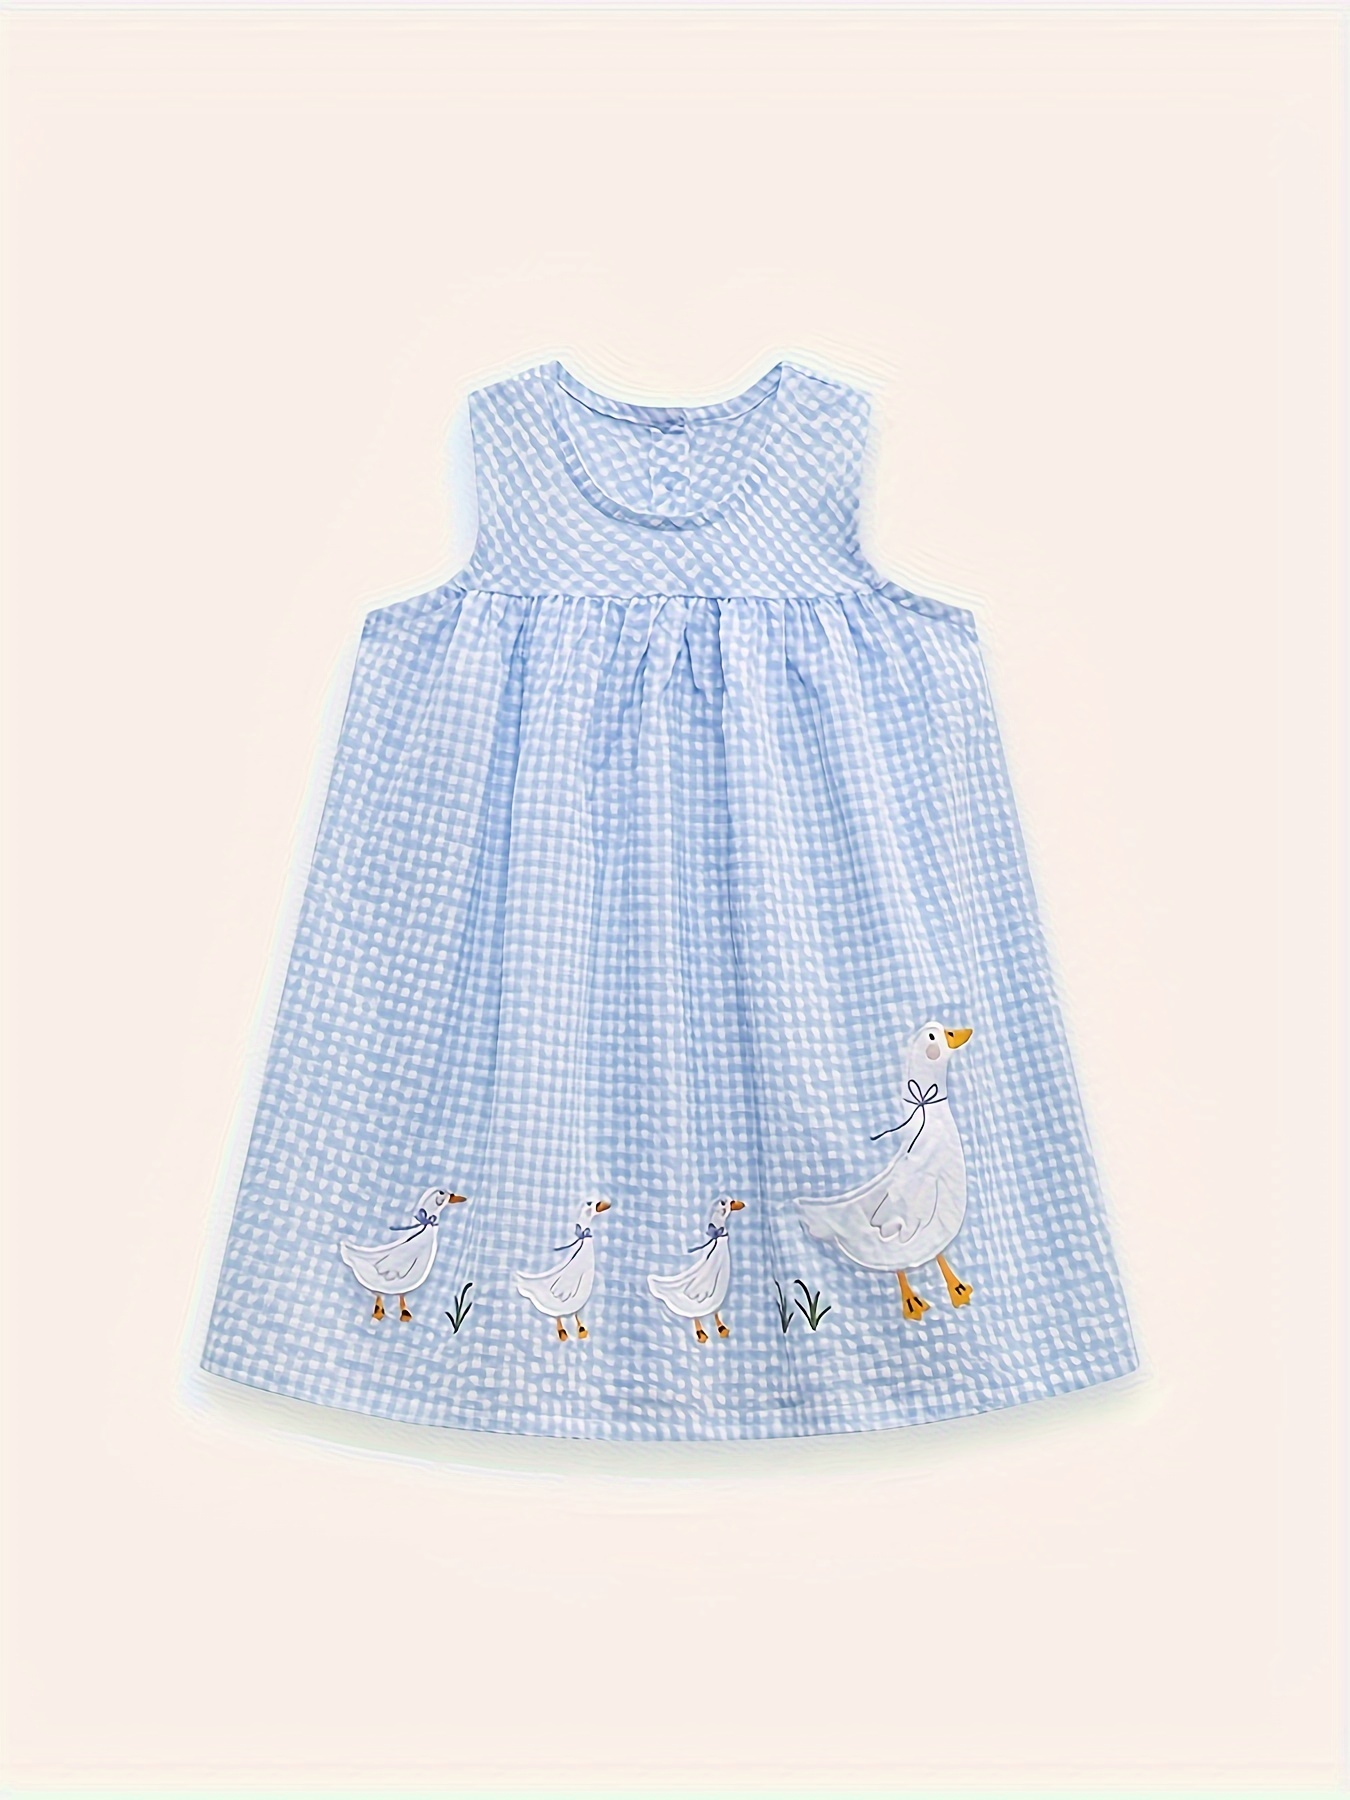 Little Girls Cute Duck Pattern Sundress, Comfy Breathable Loose Sleeveless Dresses For Girls Summer Outfit